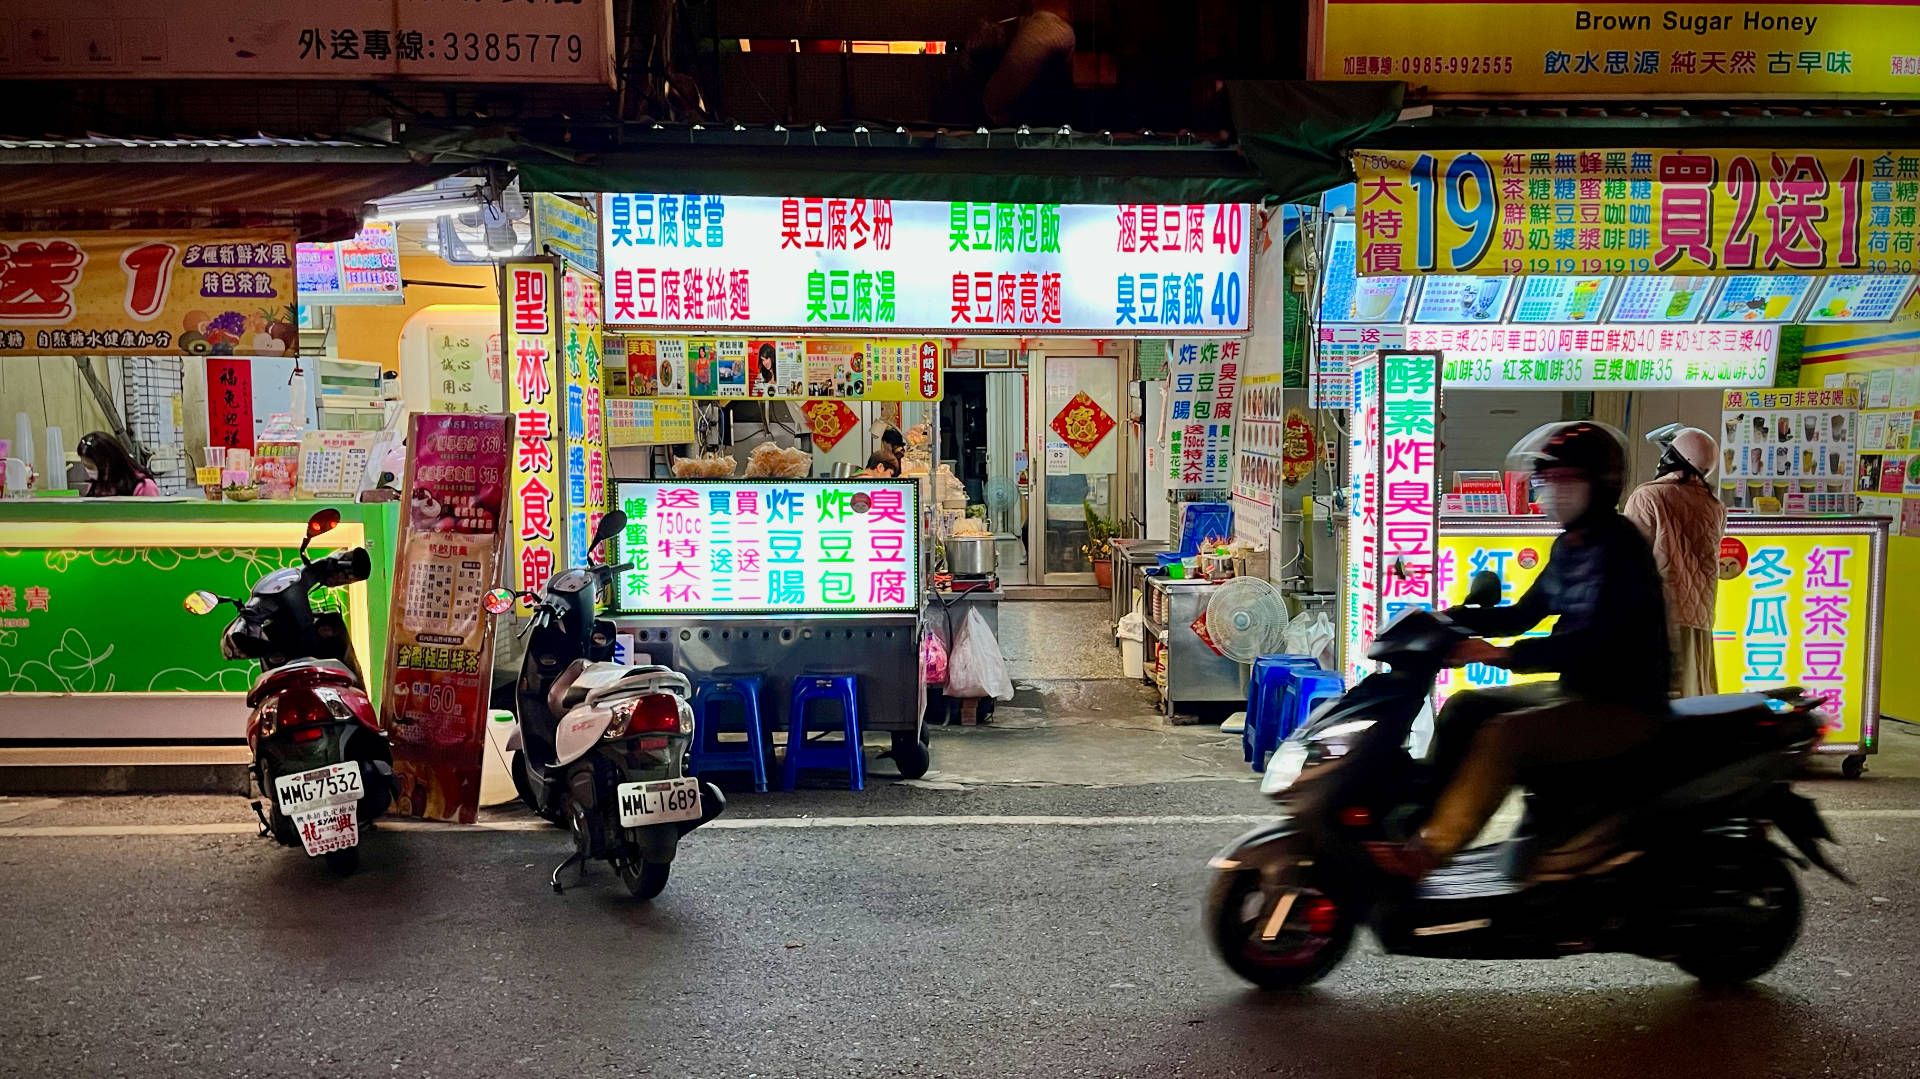 Photo of a restaurant with bright signage written in Traditional Chinese. Two scooters are parked outside, and a third scooter is being driven past.